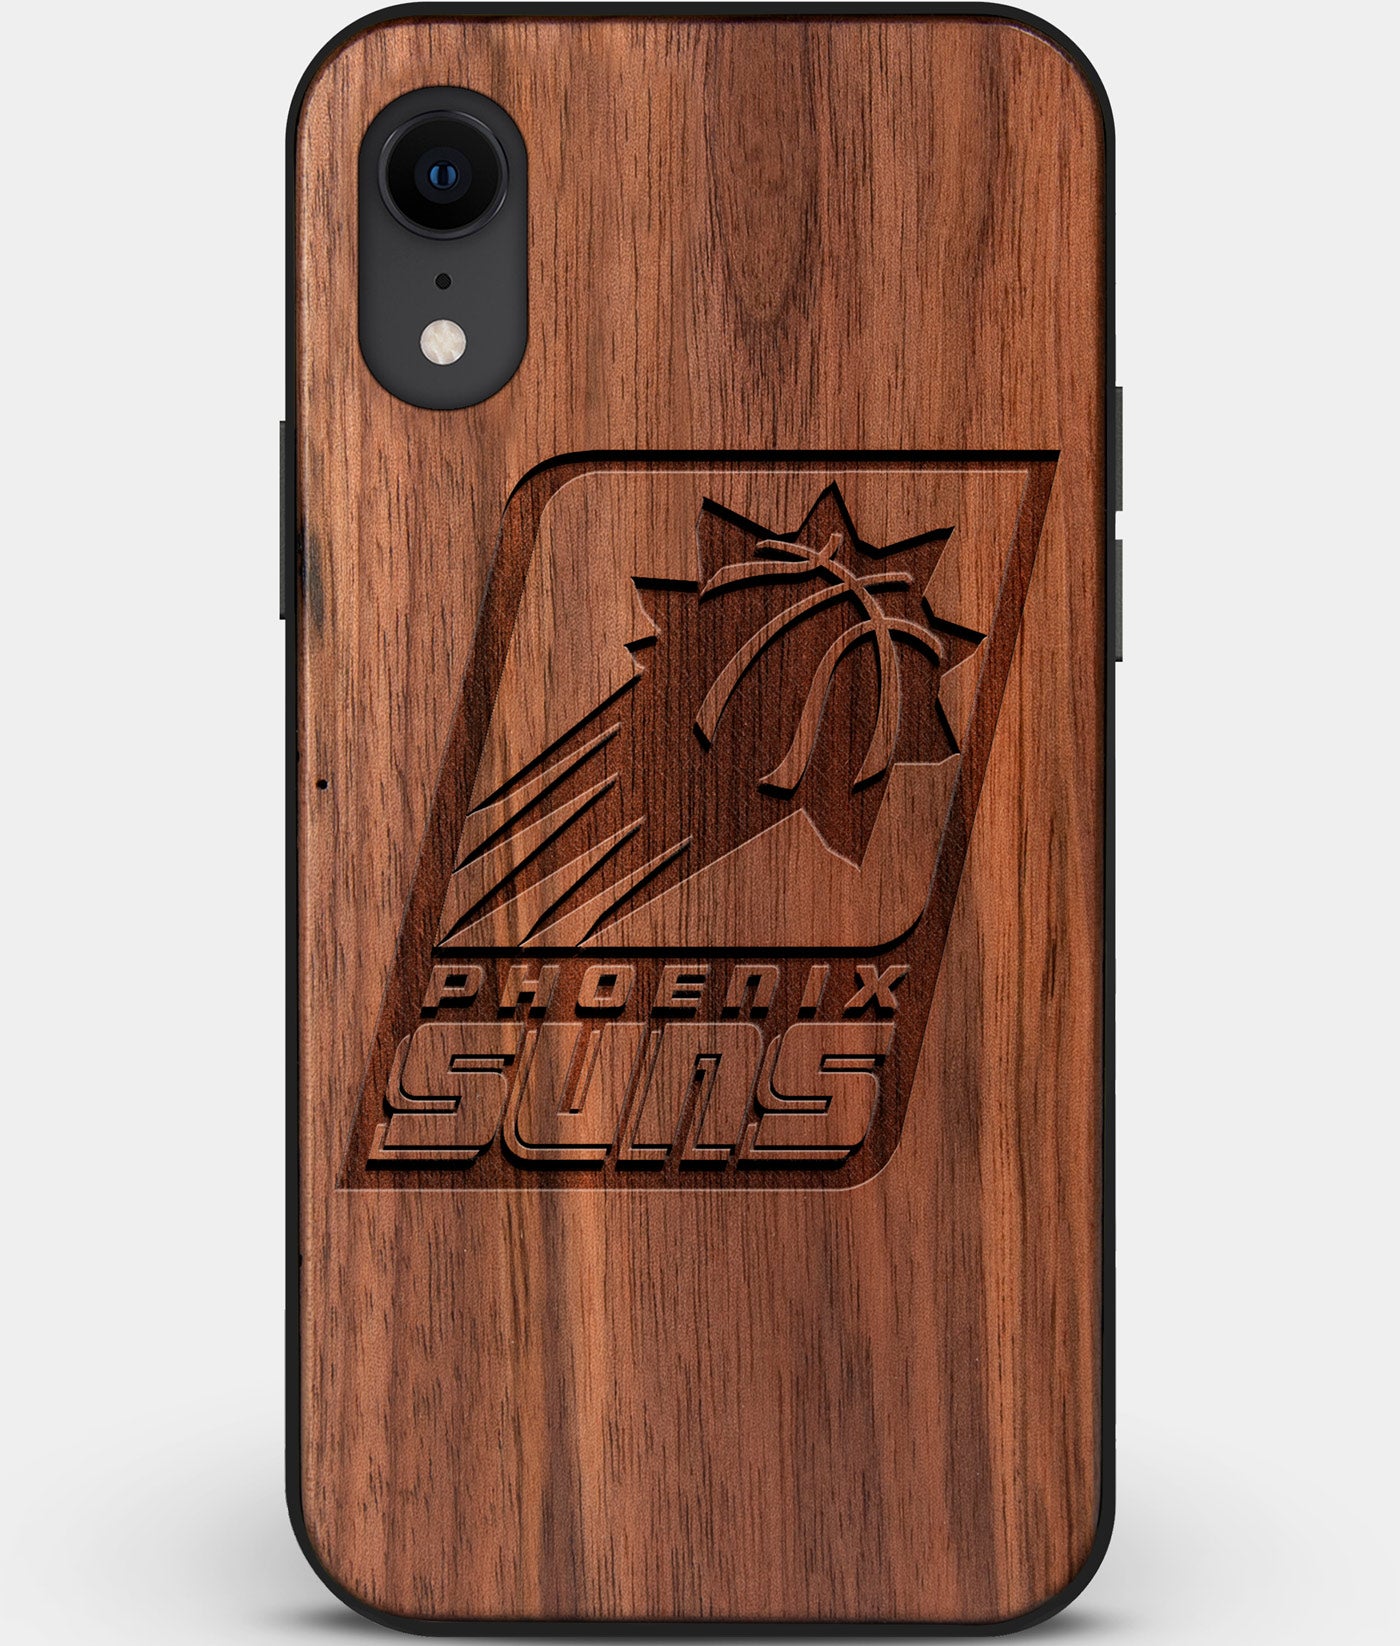 Custom Carved Wood Phoenix Suns iPhone XR Case | Personalized Walnut Wood Phoenix Suns Cover, Birthday Gift, Gifts For Him, Monogrammed Gift For Fan | by Engraved In Nature